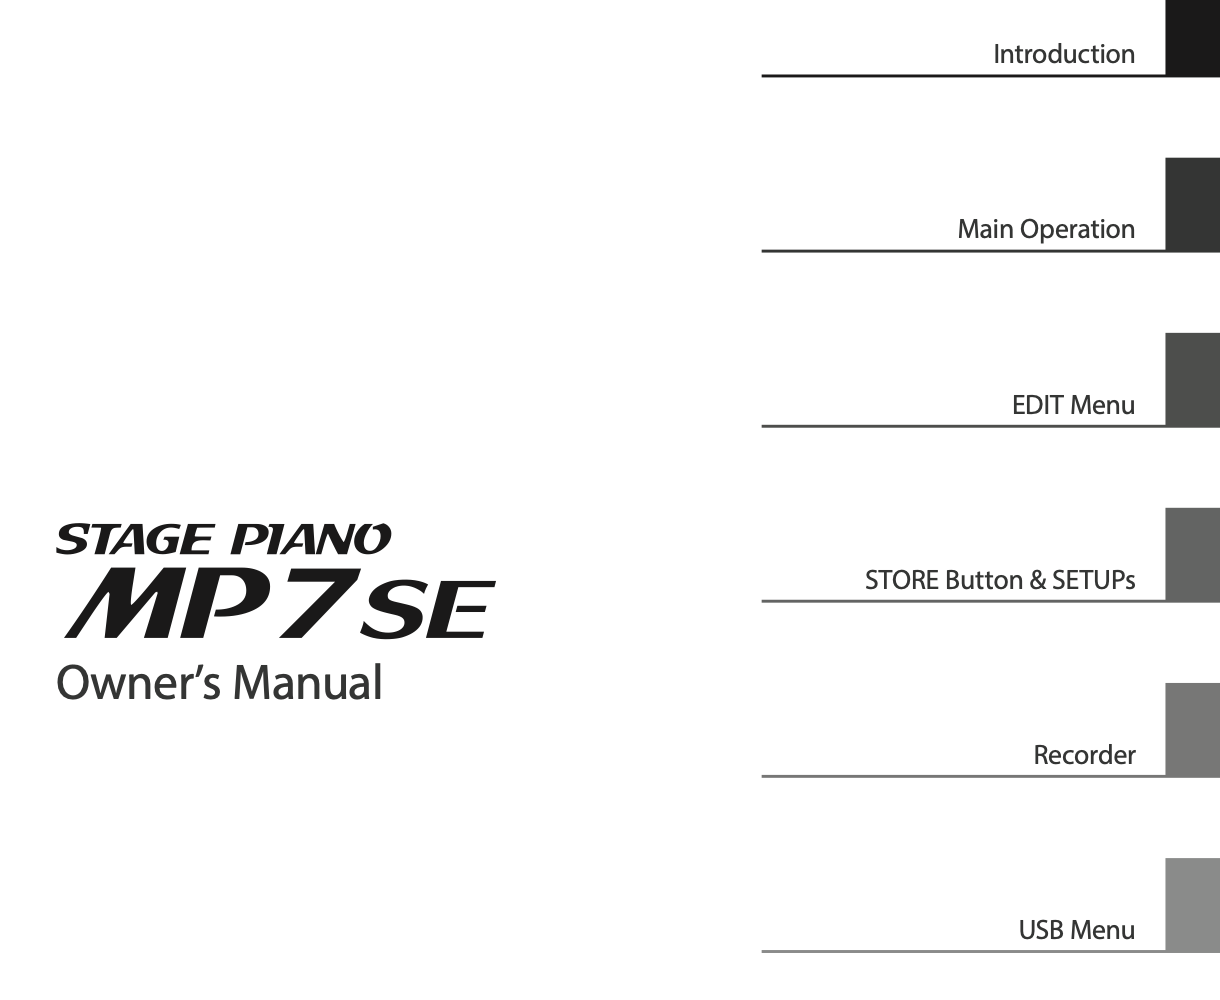 MP7SE Owners Manual